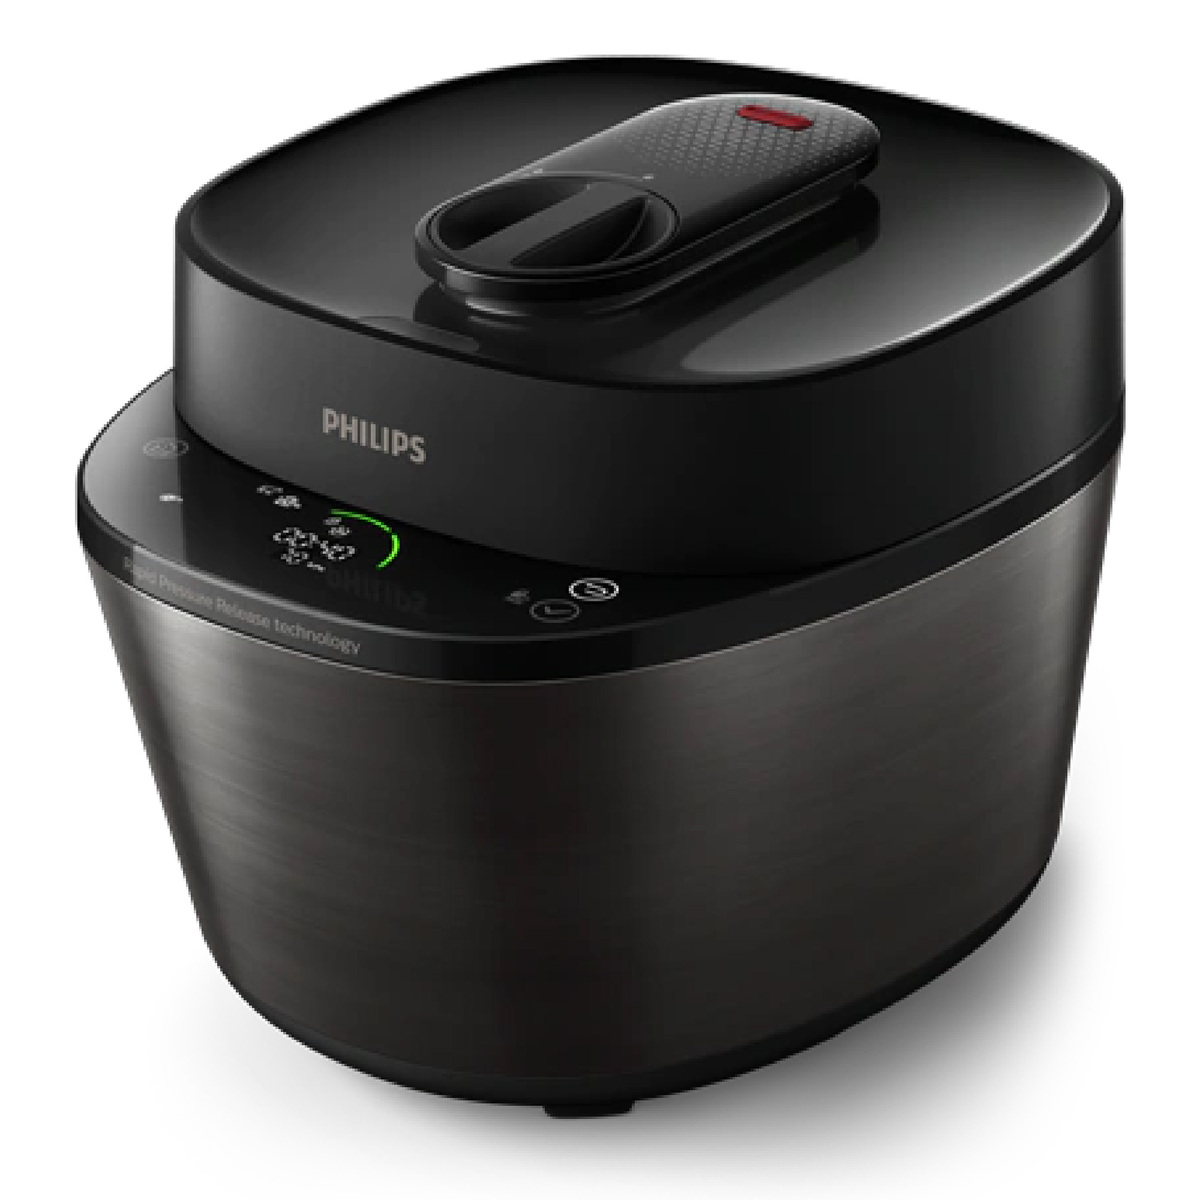 Philips All-in-One Pressure Cooker, 5 L, Black, HD2151/56